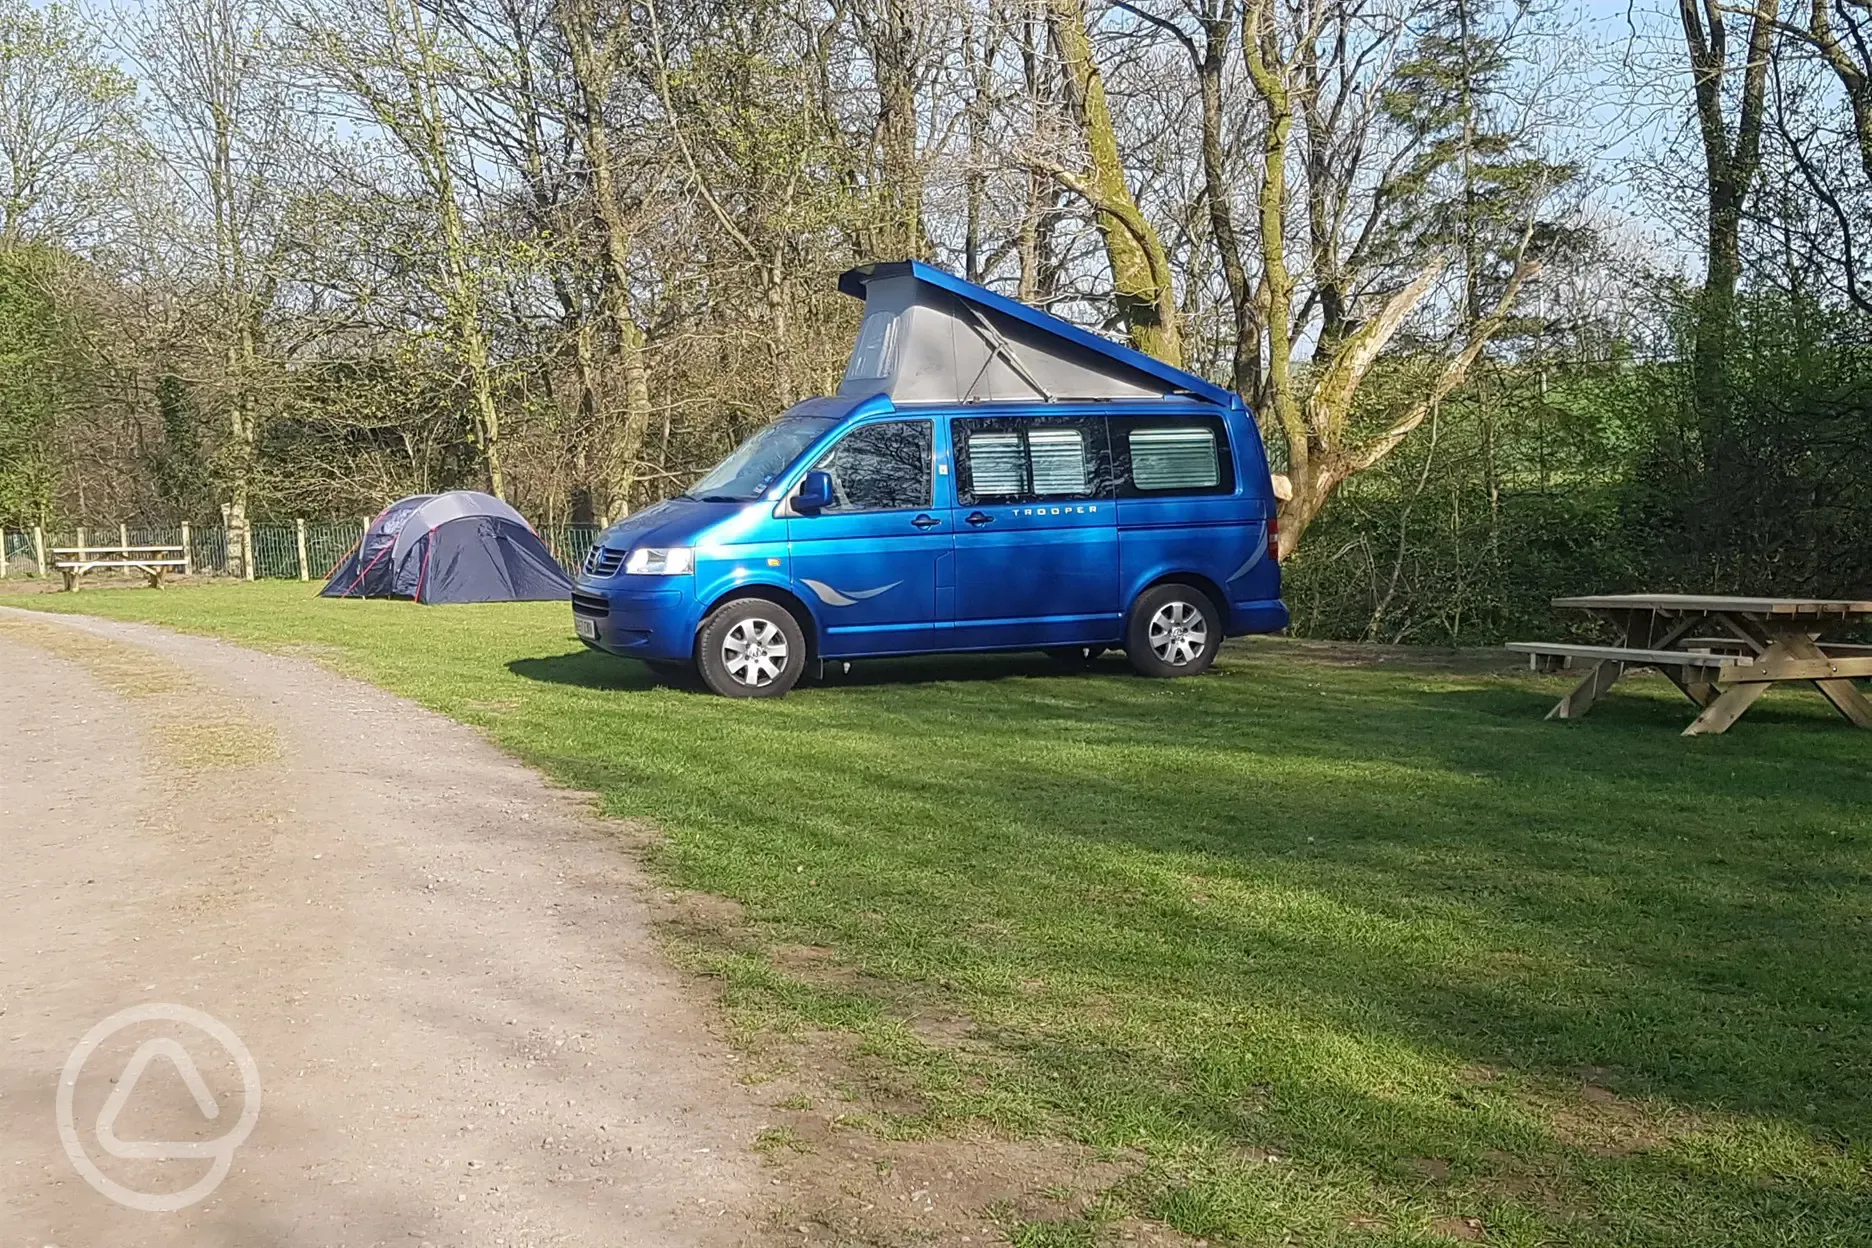 Camper on the grass in April